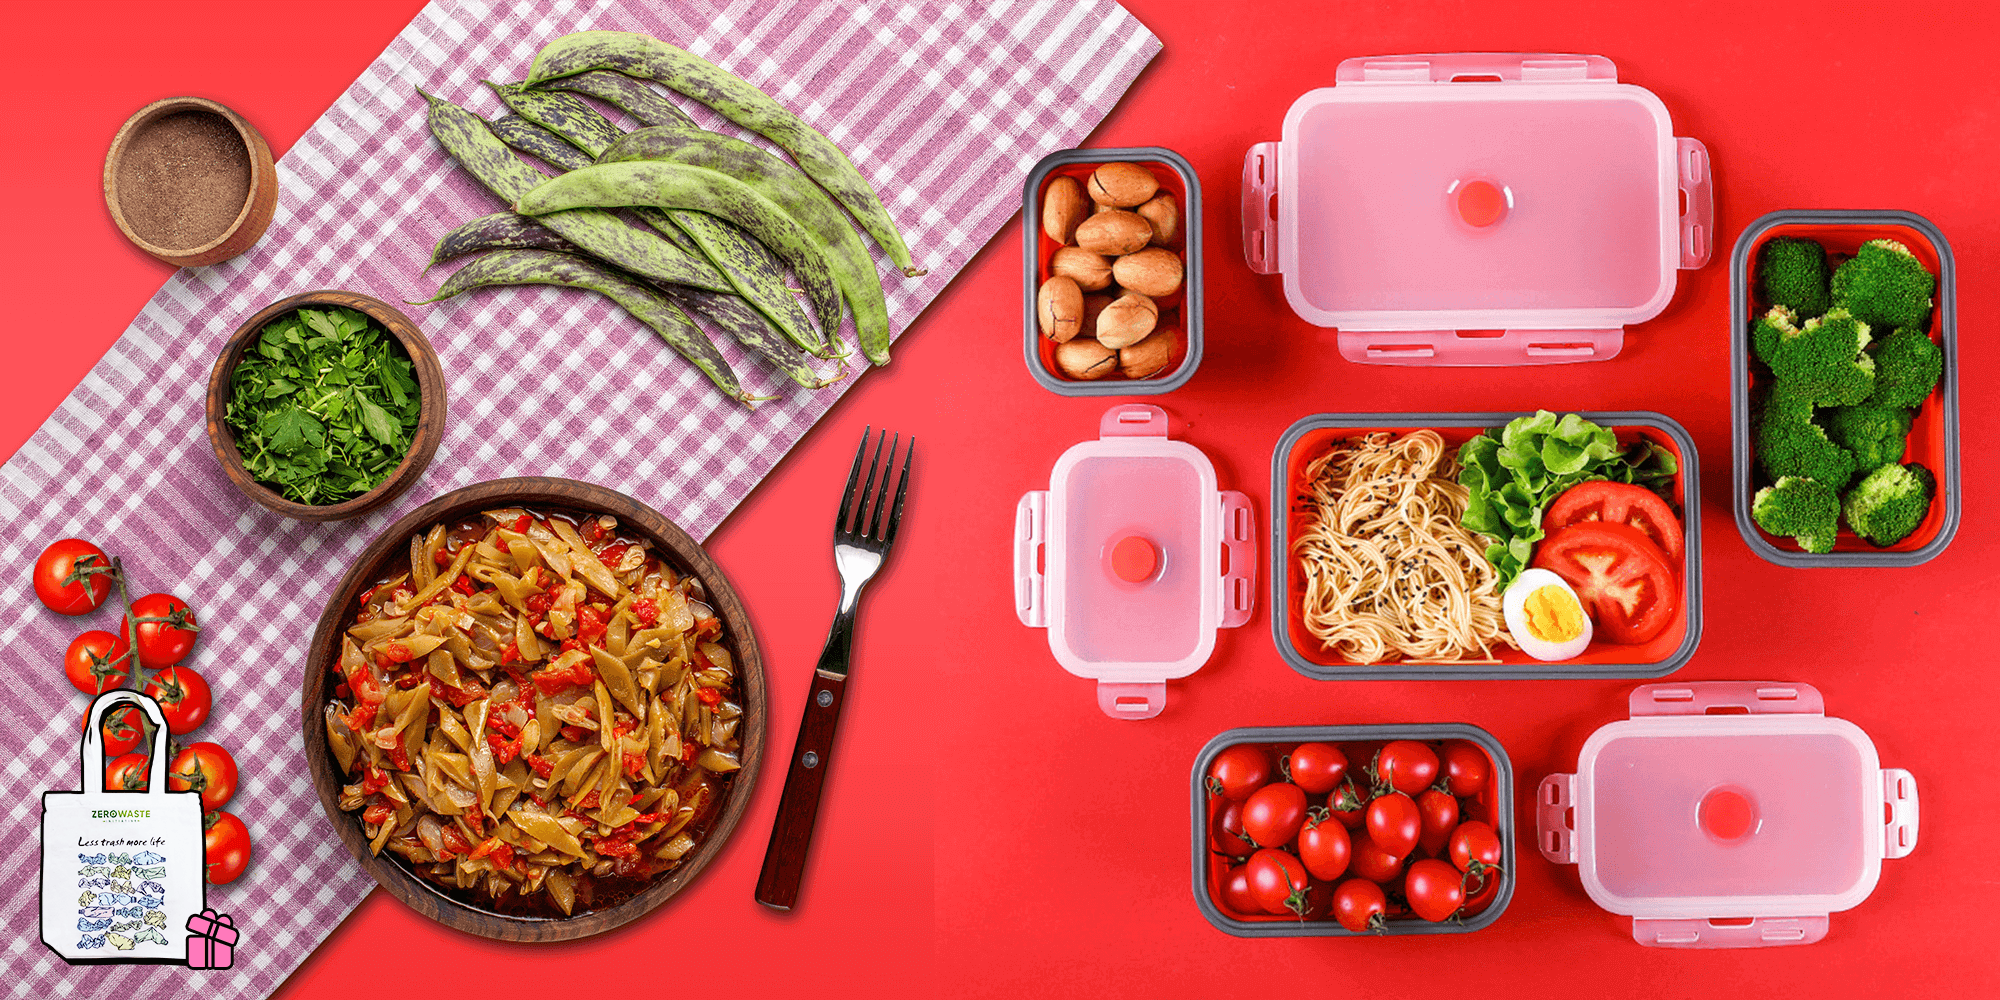 Zero Waste Lunch Boxes - For a Stylish and Sustainable Meal on the Go